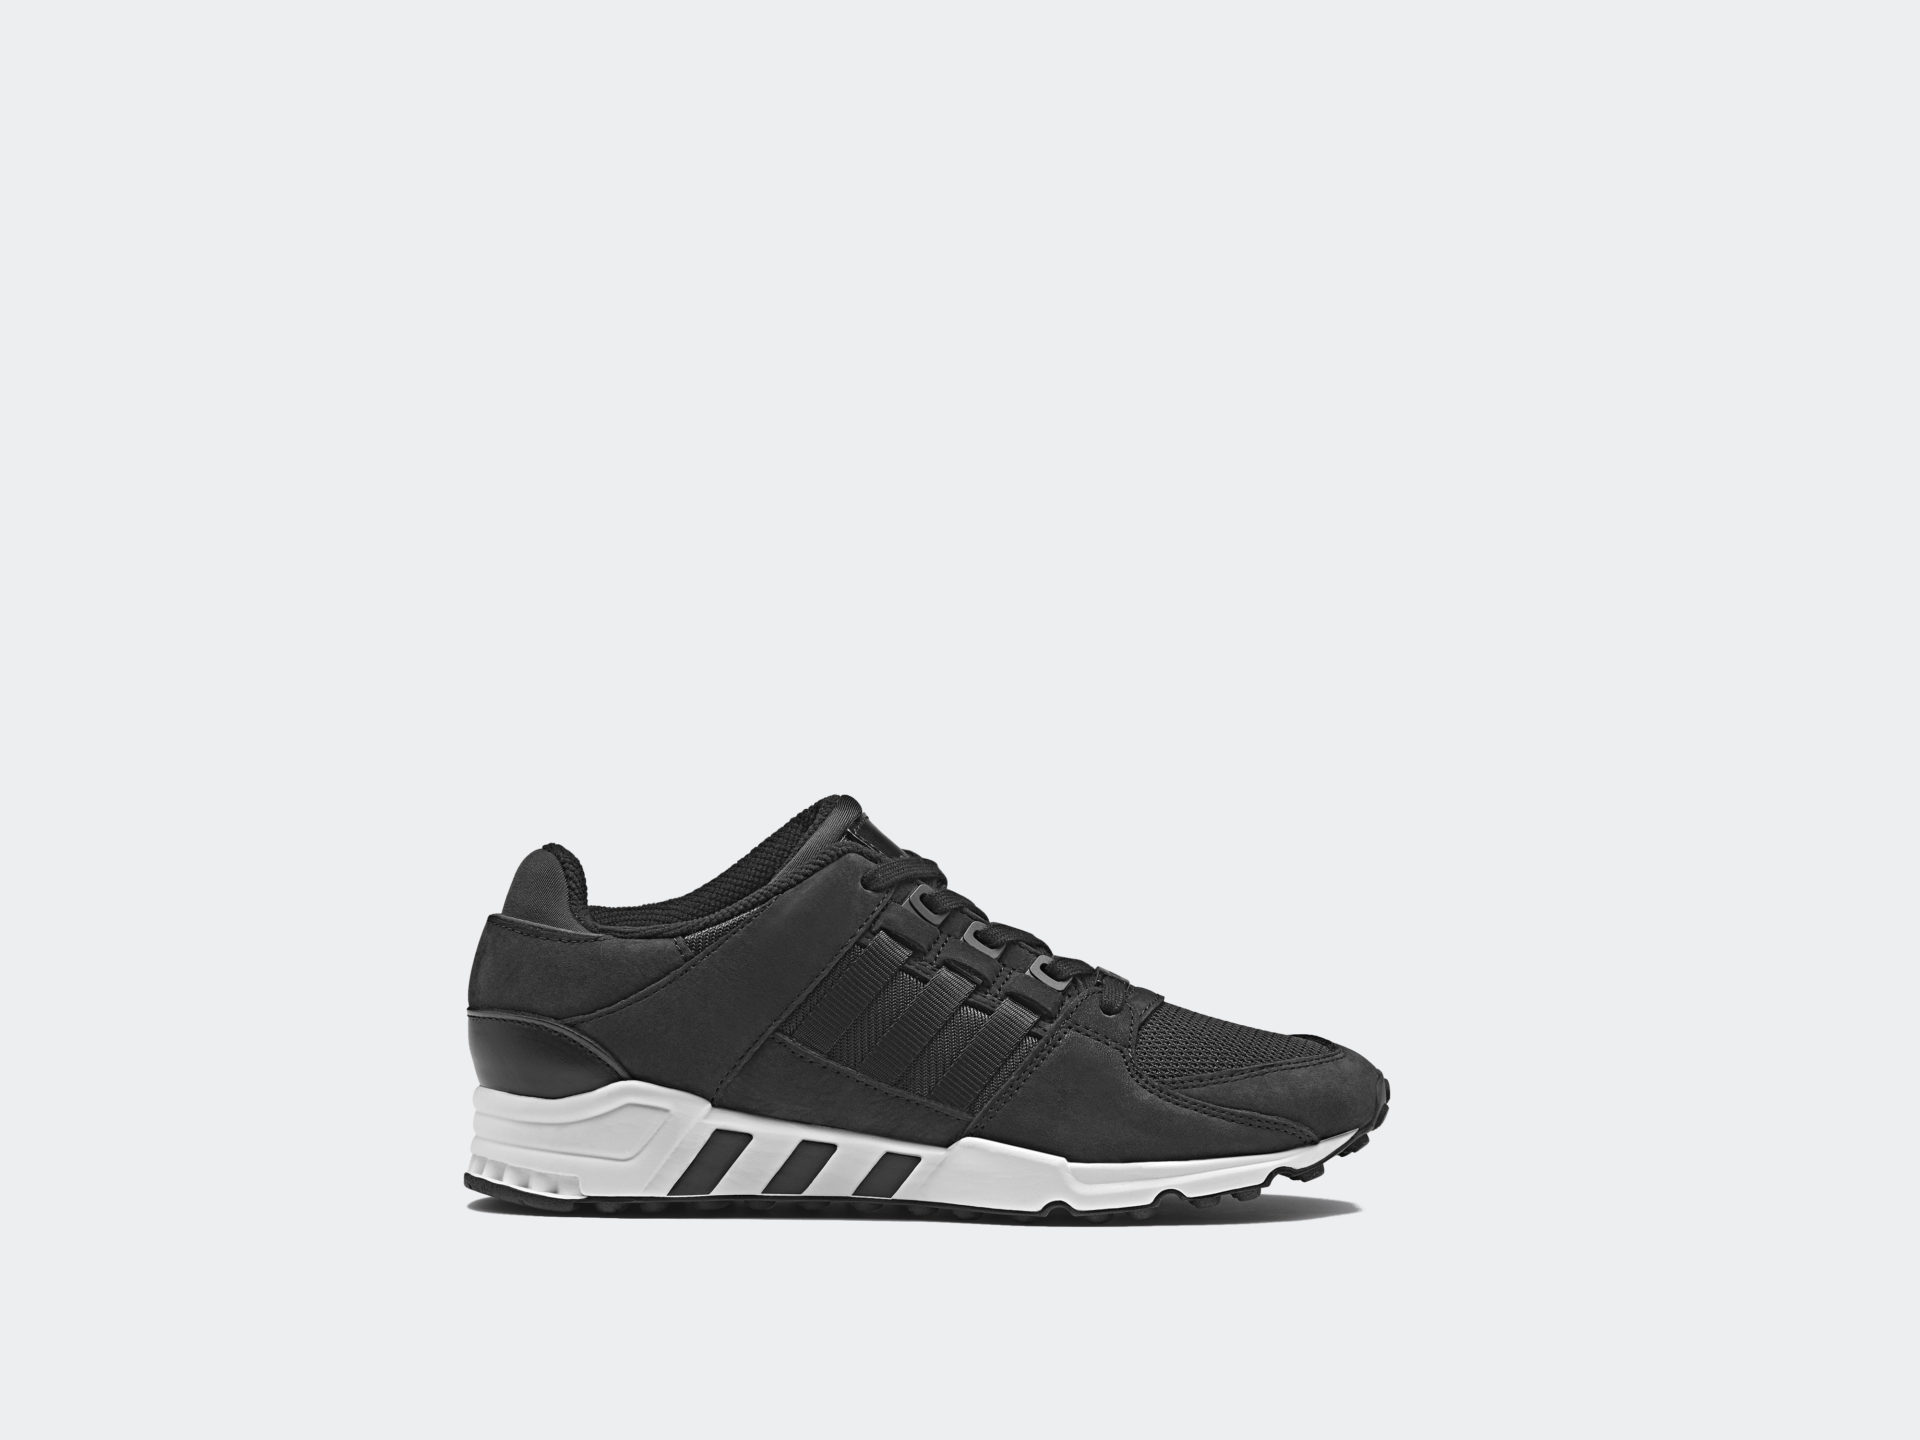 adidas EQT Support RF "Milled Leather"